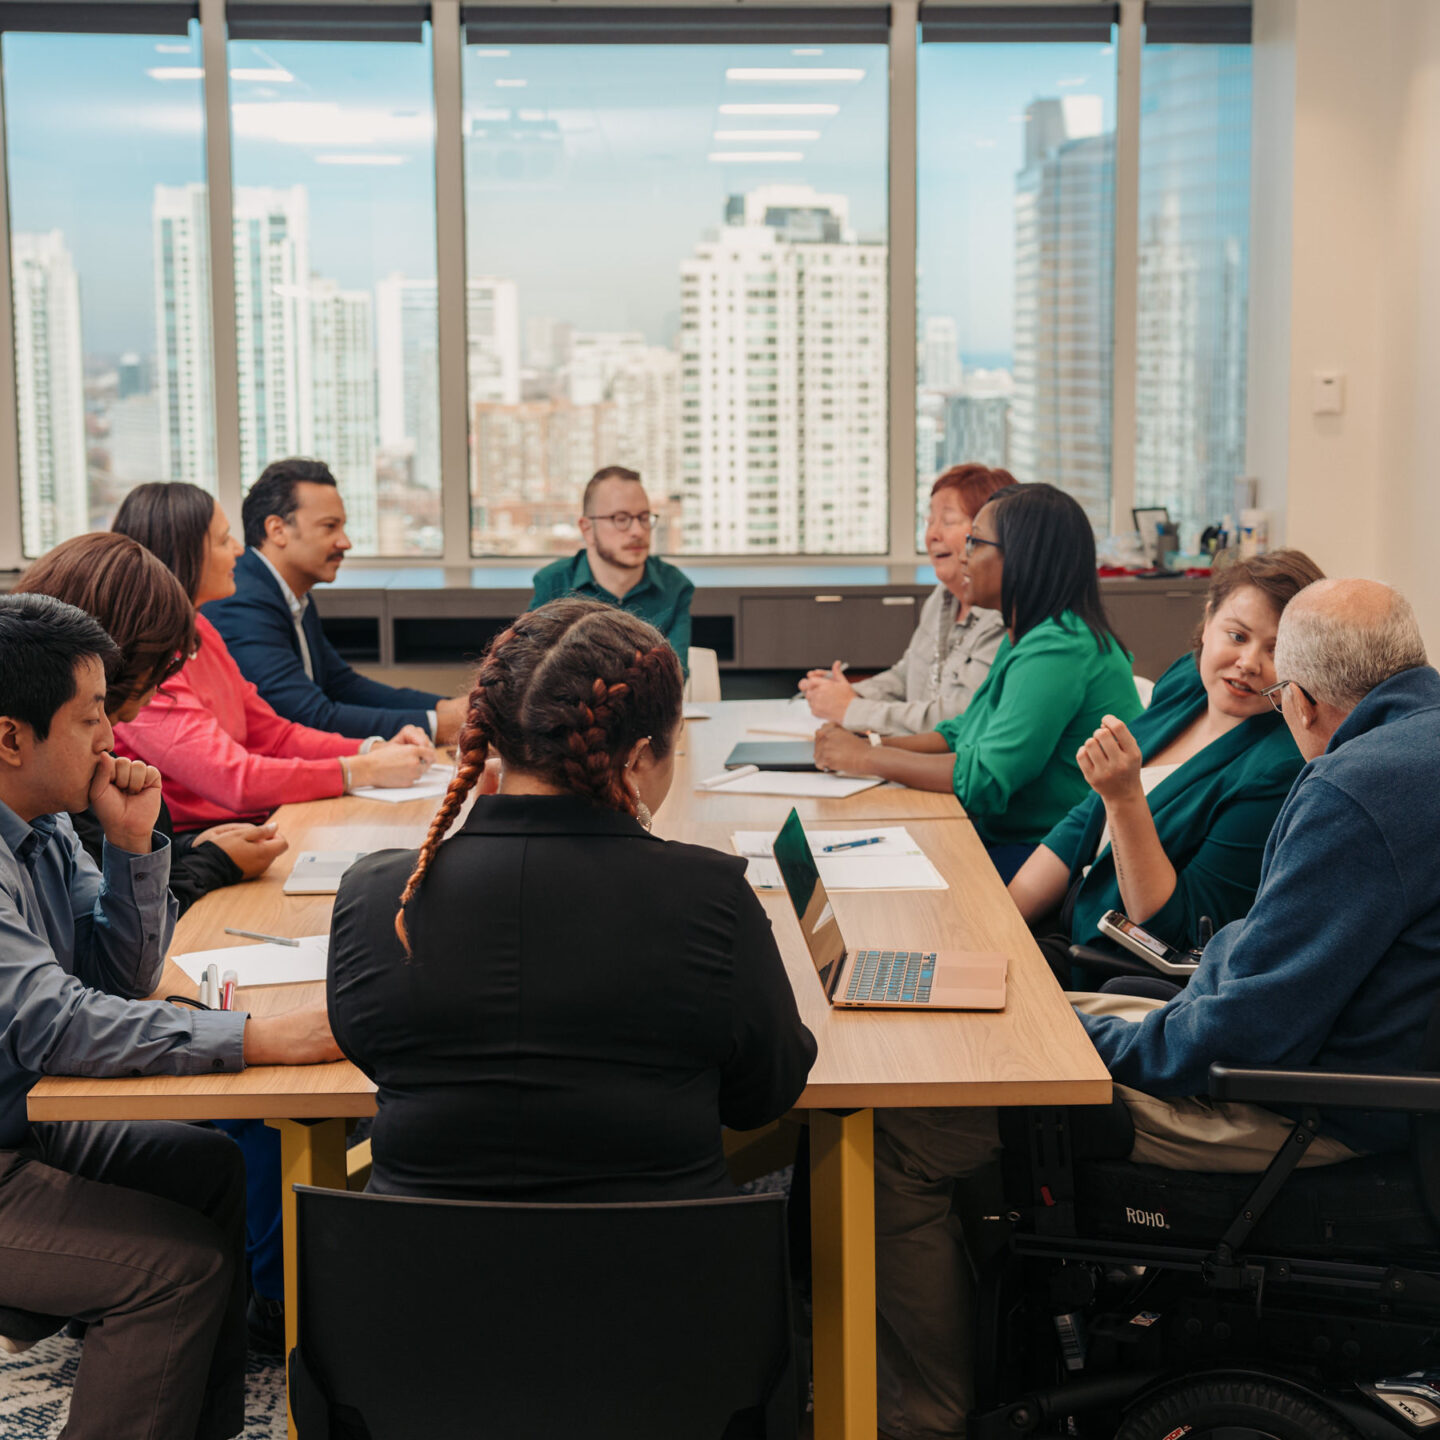 A group of diverse professionals representing various disability identities gather in a meeting around a conference table. Windows overlook a city skyline.